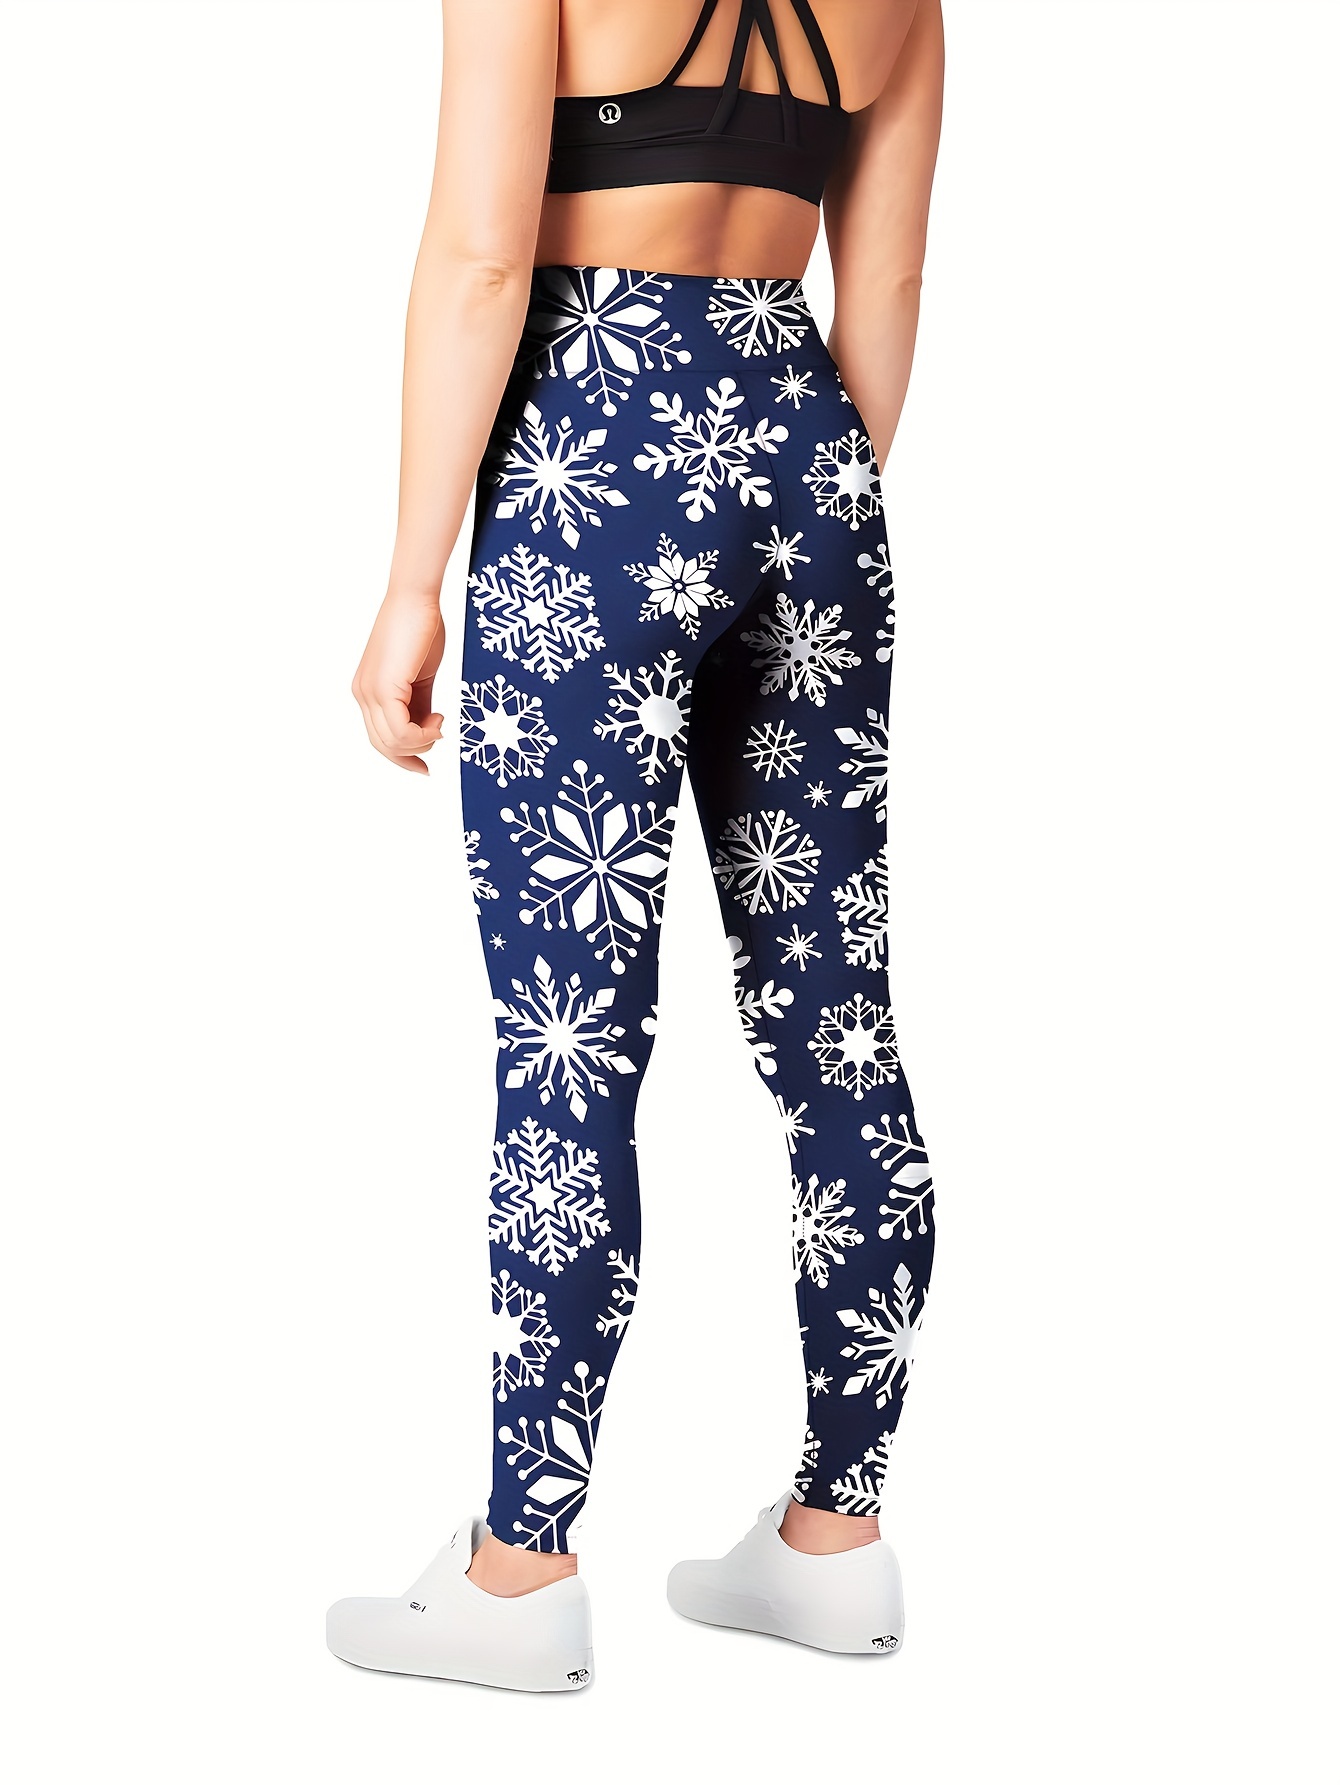 Christmas Print Ankle Leggings 1 inch Elastic Waisted with Christmas Tree  Deer and Snow - Its All Leggings